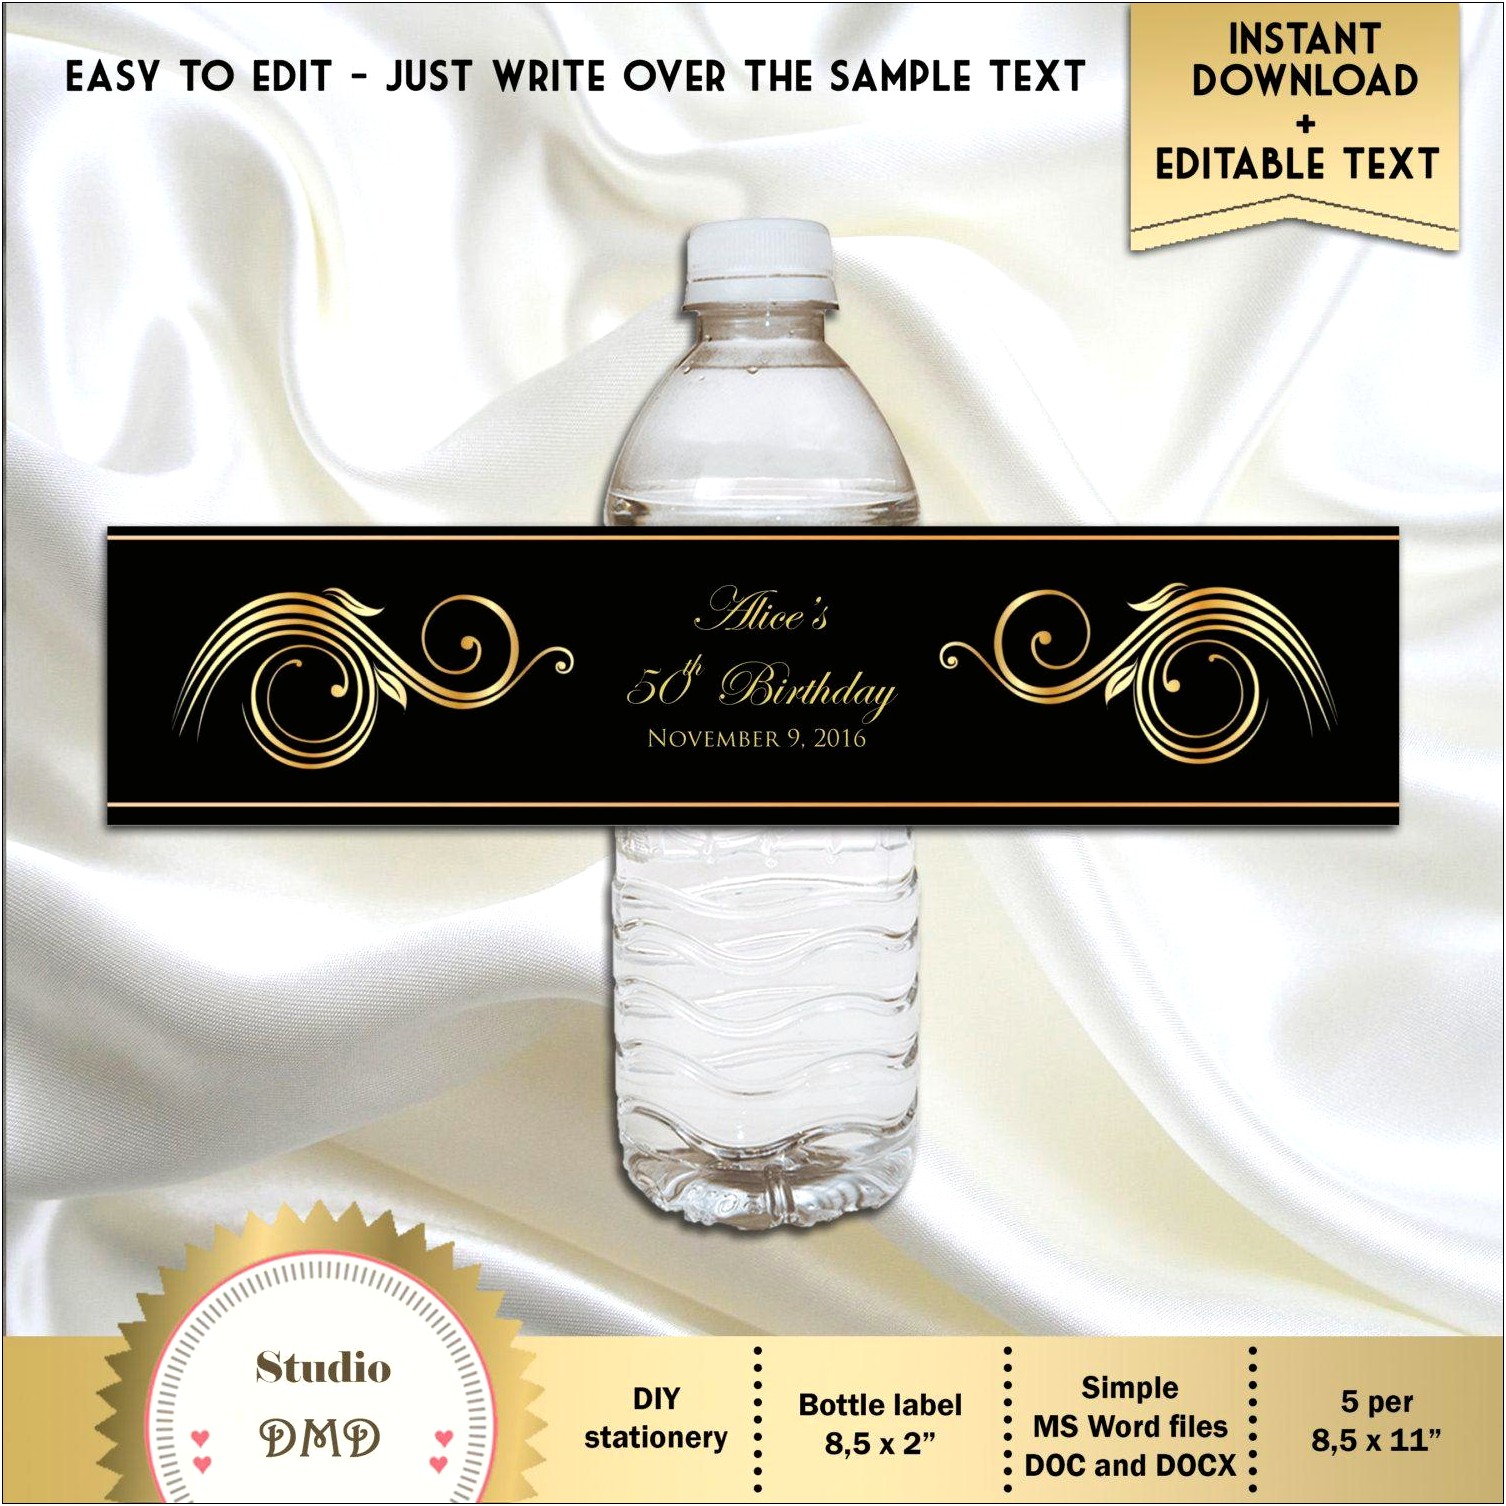 Free Water Bottle Label Template 50th Birthday